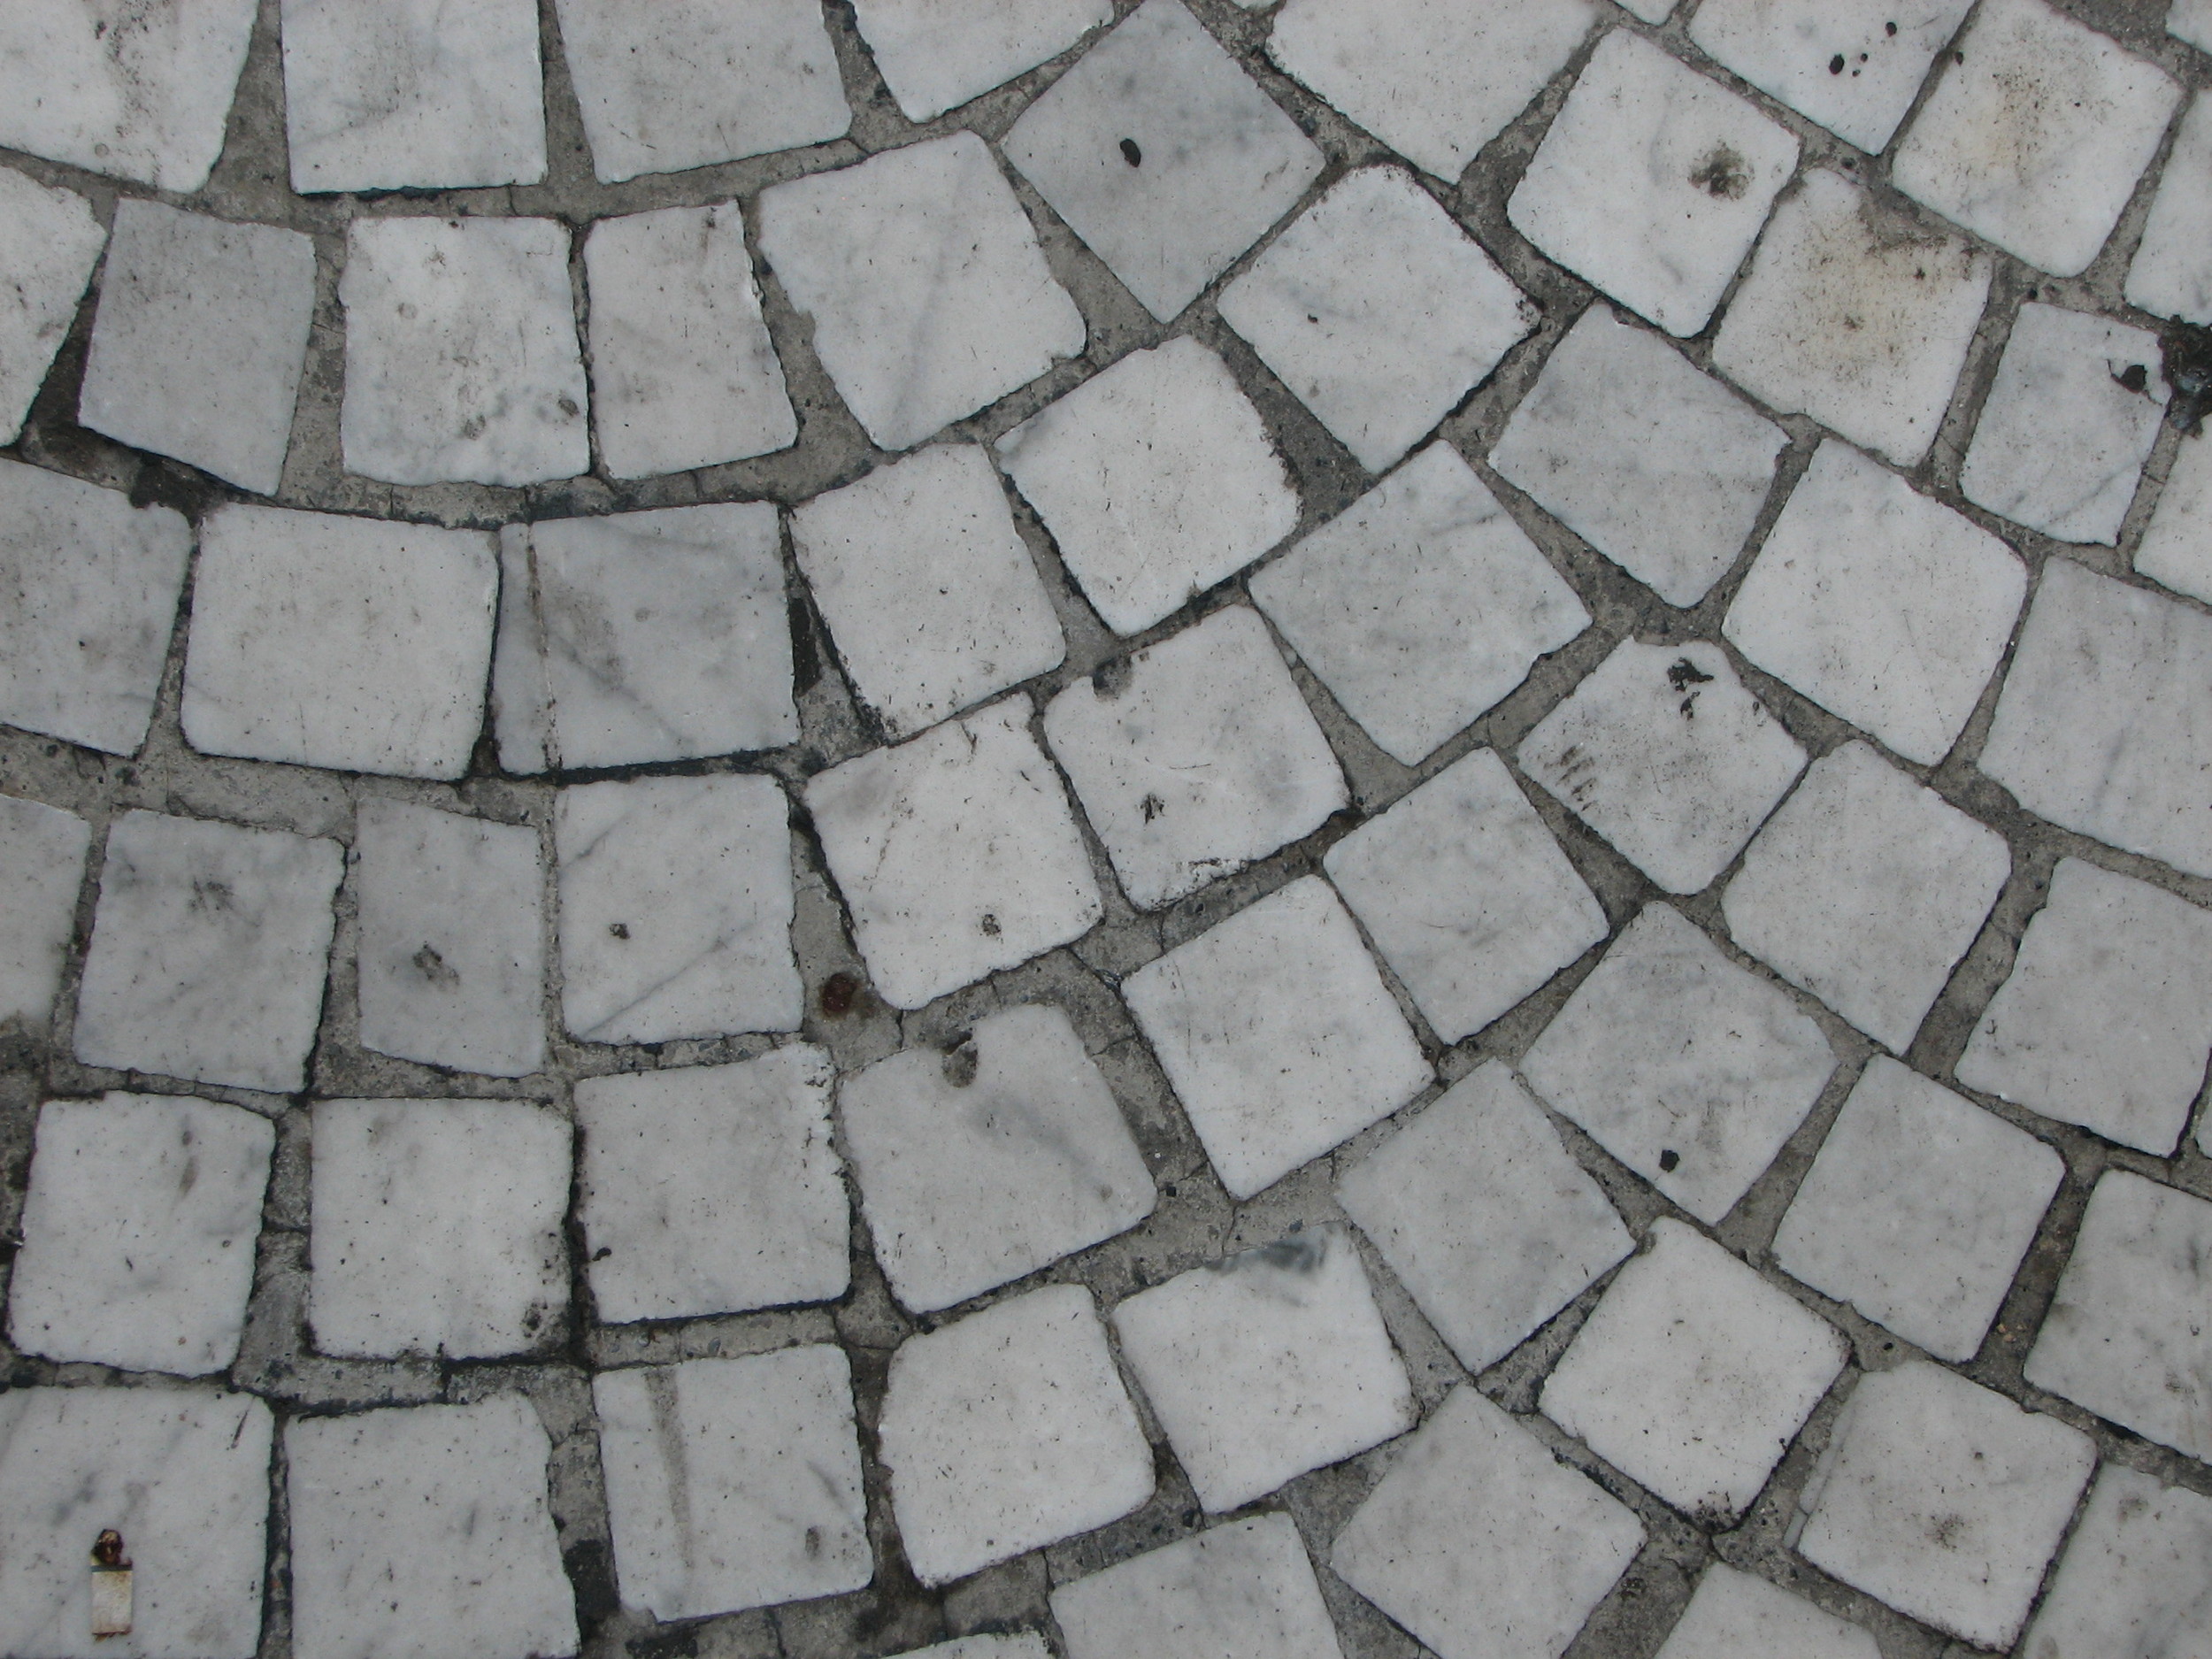  Marble tile floor or road, Italy 